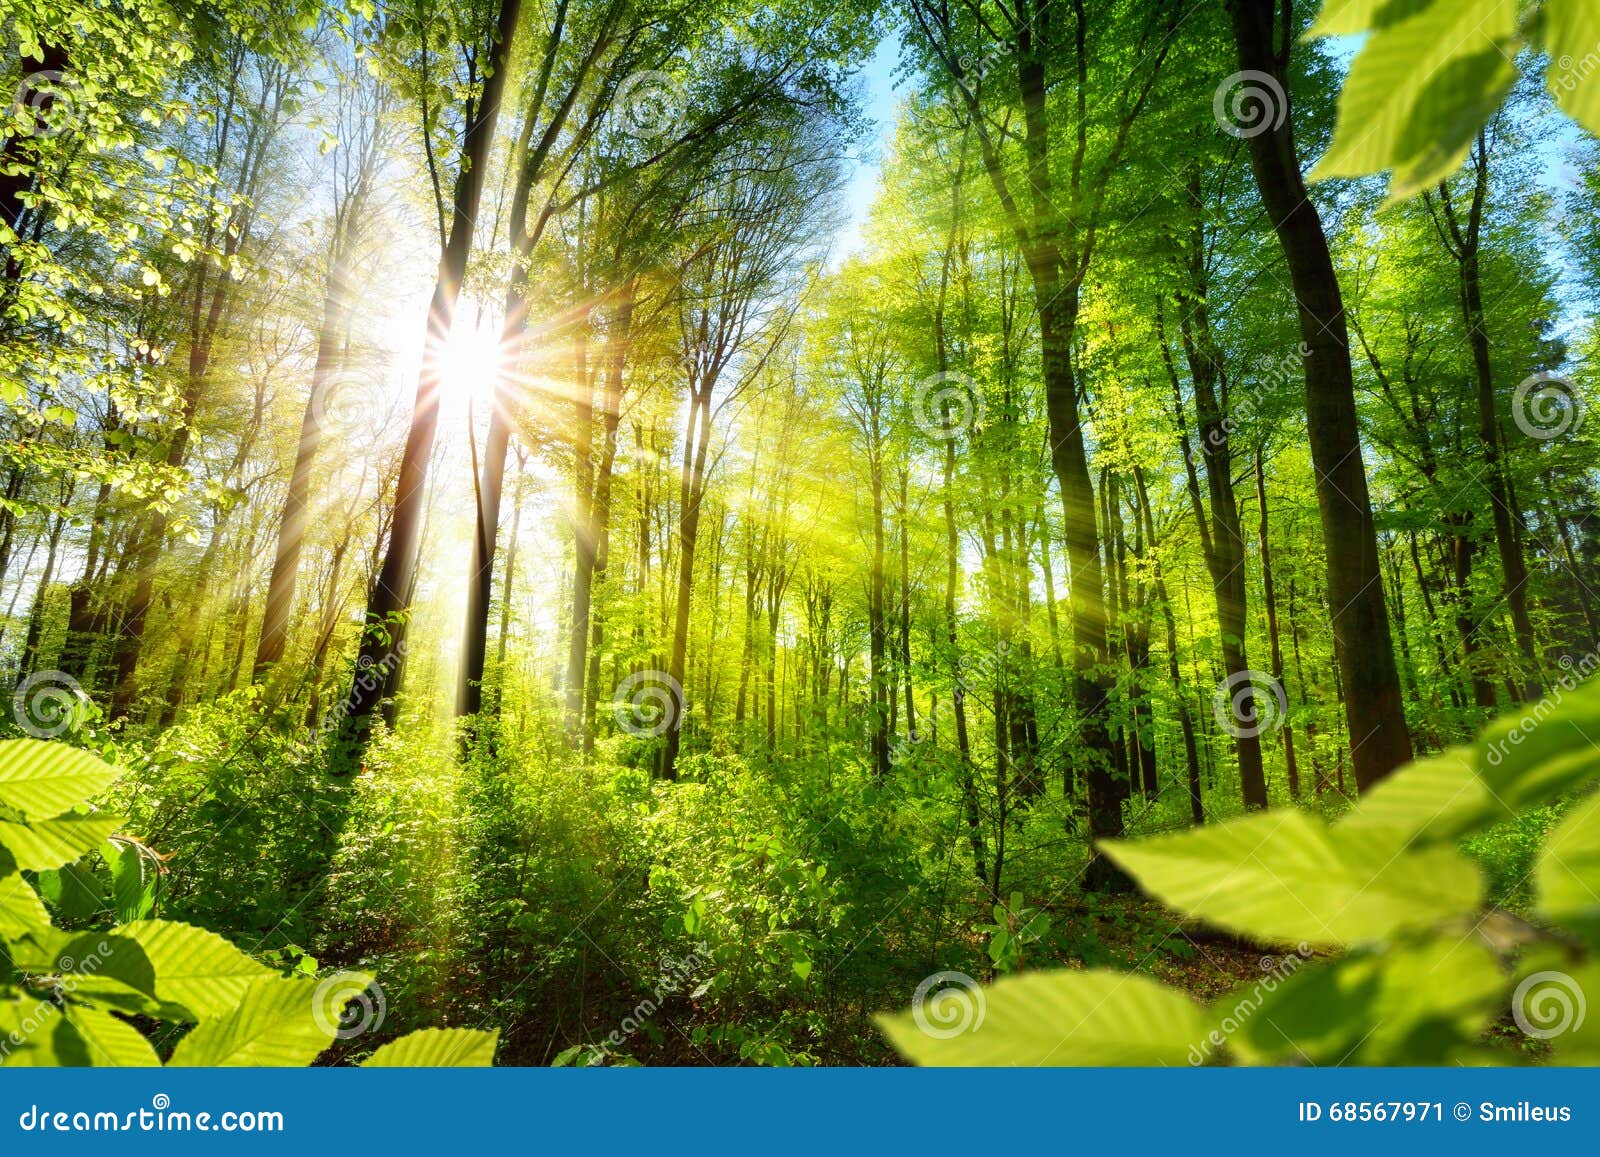 sunlit foliage in the forest